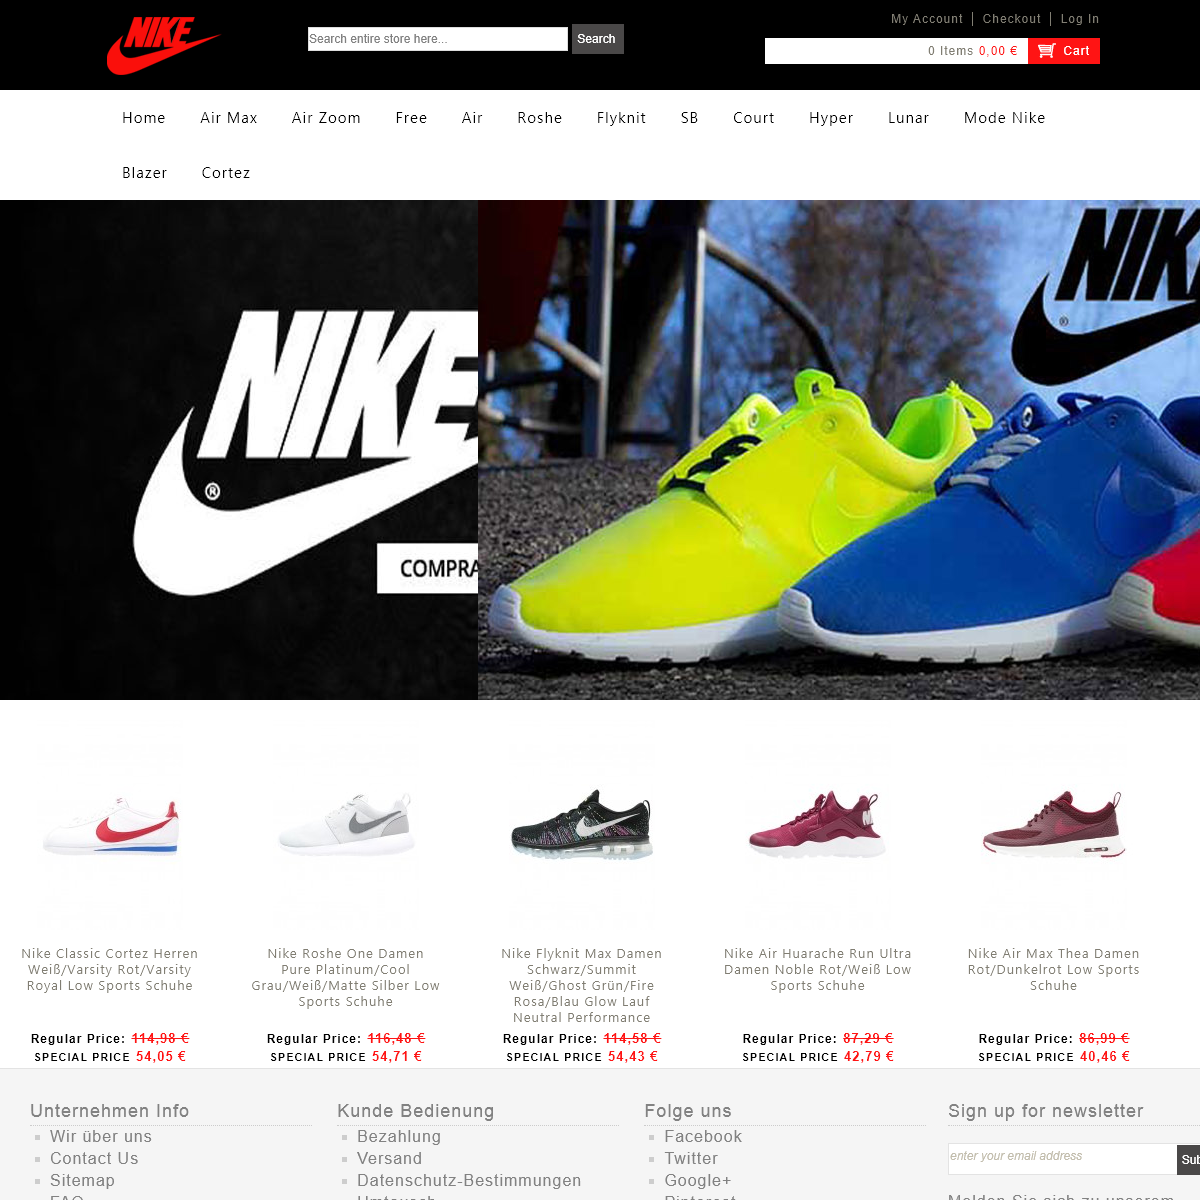 A complete backup of nikeschuhes.de